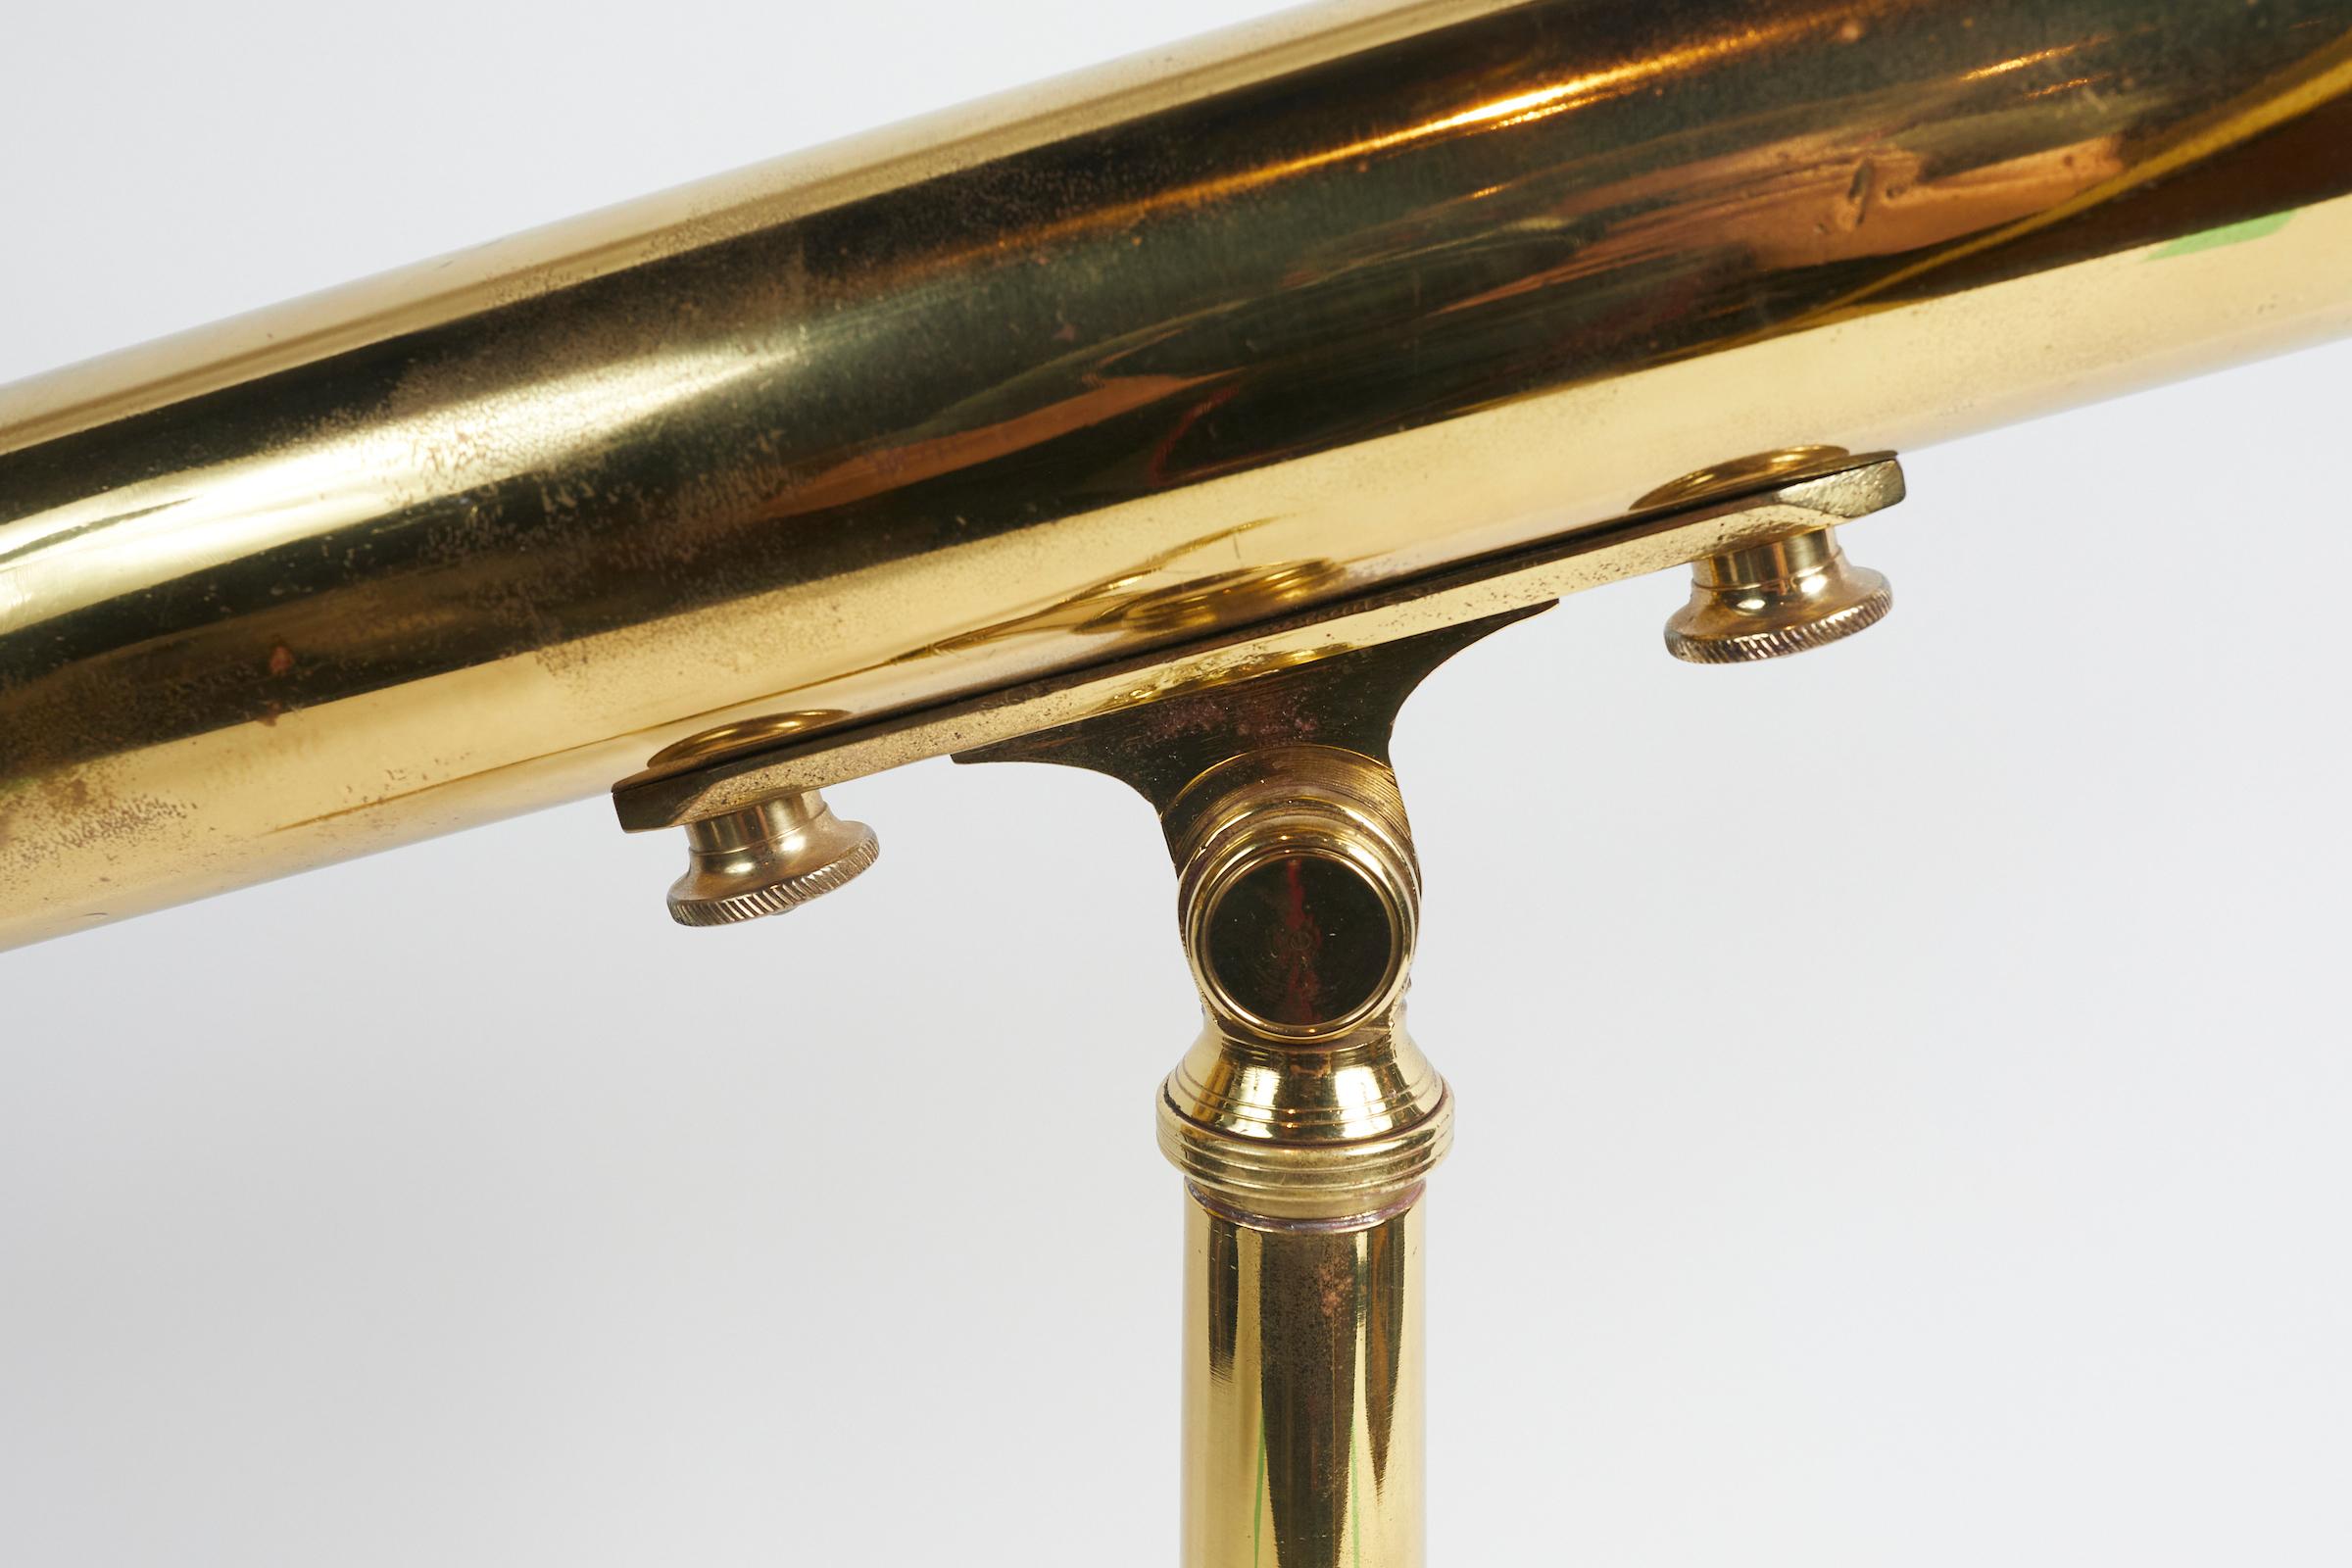 Large Antique Solid Brass Library Telescope by Broadhurst, Clarkson and Co
Marked: '' 63 Farringdon Rd London EC. Broadhurst, Clarkson and Co''